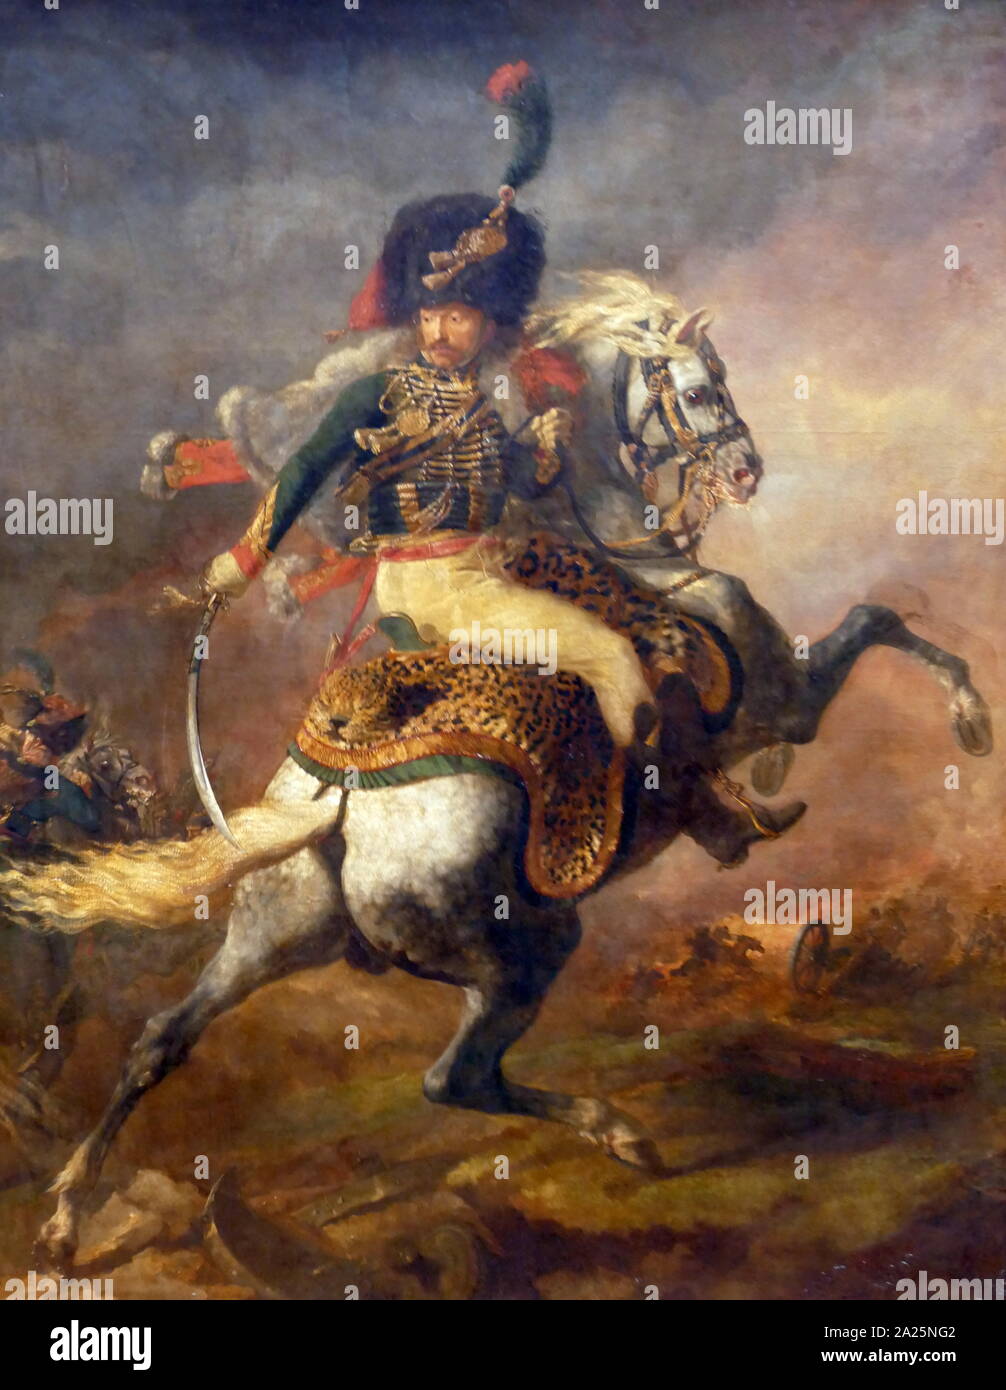 Painting titled 'The Charging Chasseur' by Theodore Gericault. Theodore Gericault (1791-1824) a French painter and lithographer. Stock Photo